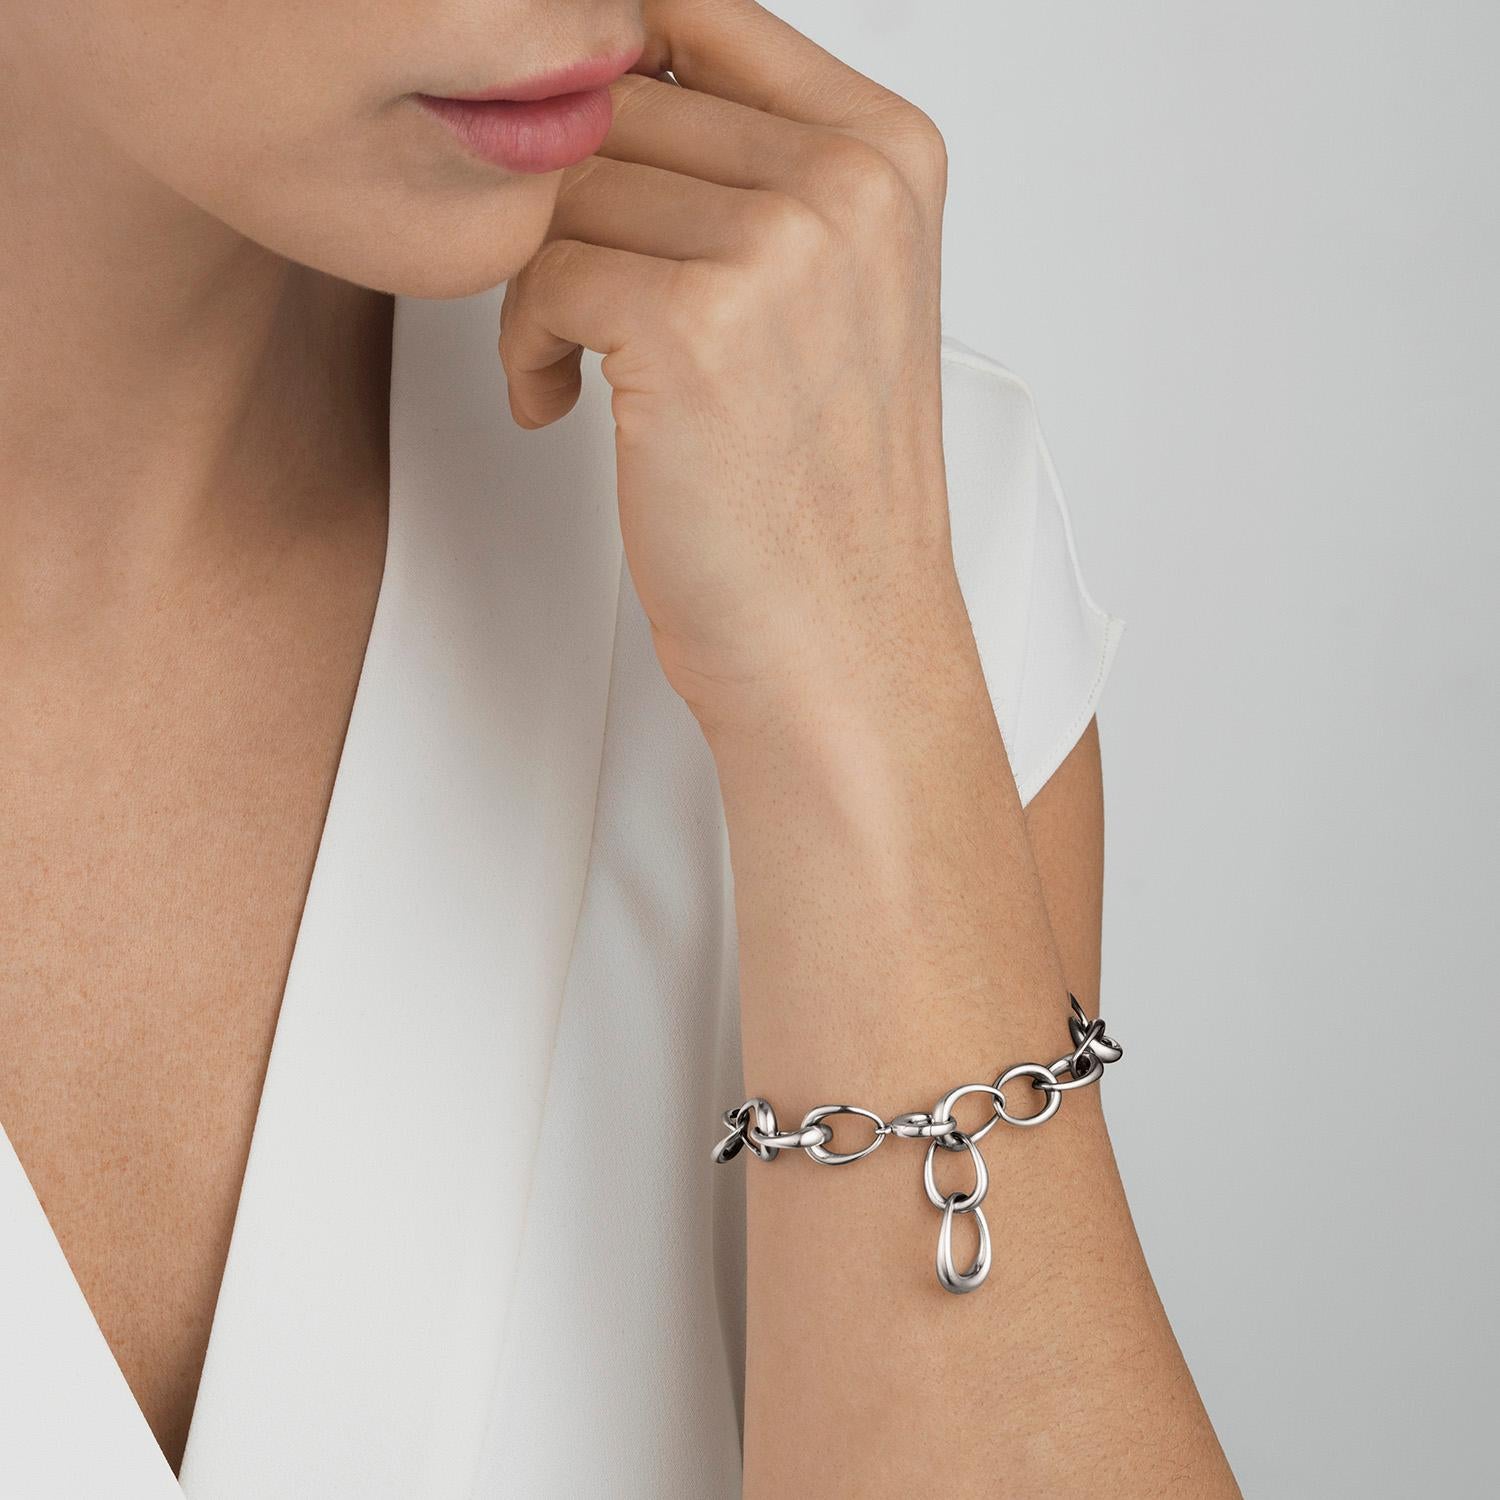 Organic natural forms replace conventional links in this striking and contemporary version of a classic sterling silver chain bracelet. Inspired by unbreakable bond between mother and daughter, the bracelet symbolises how closely we are connected to